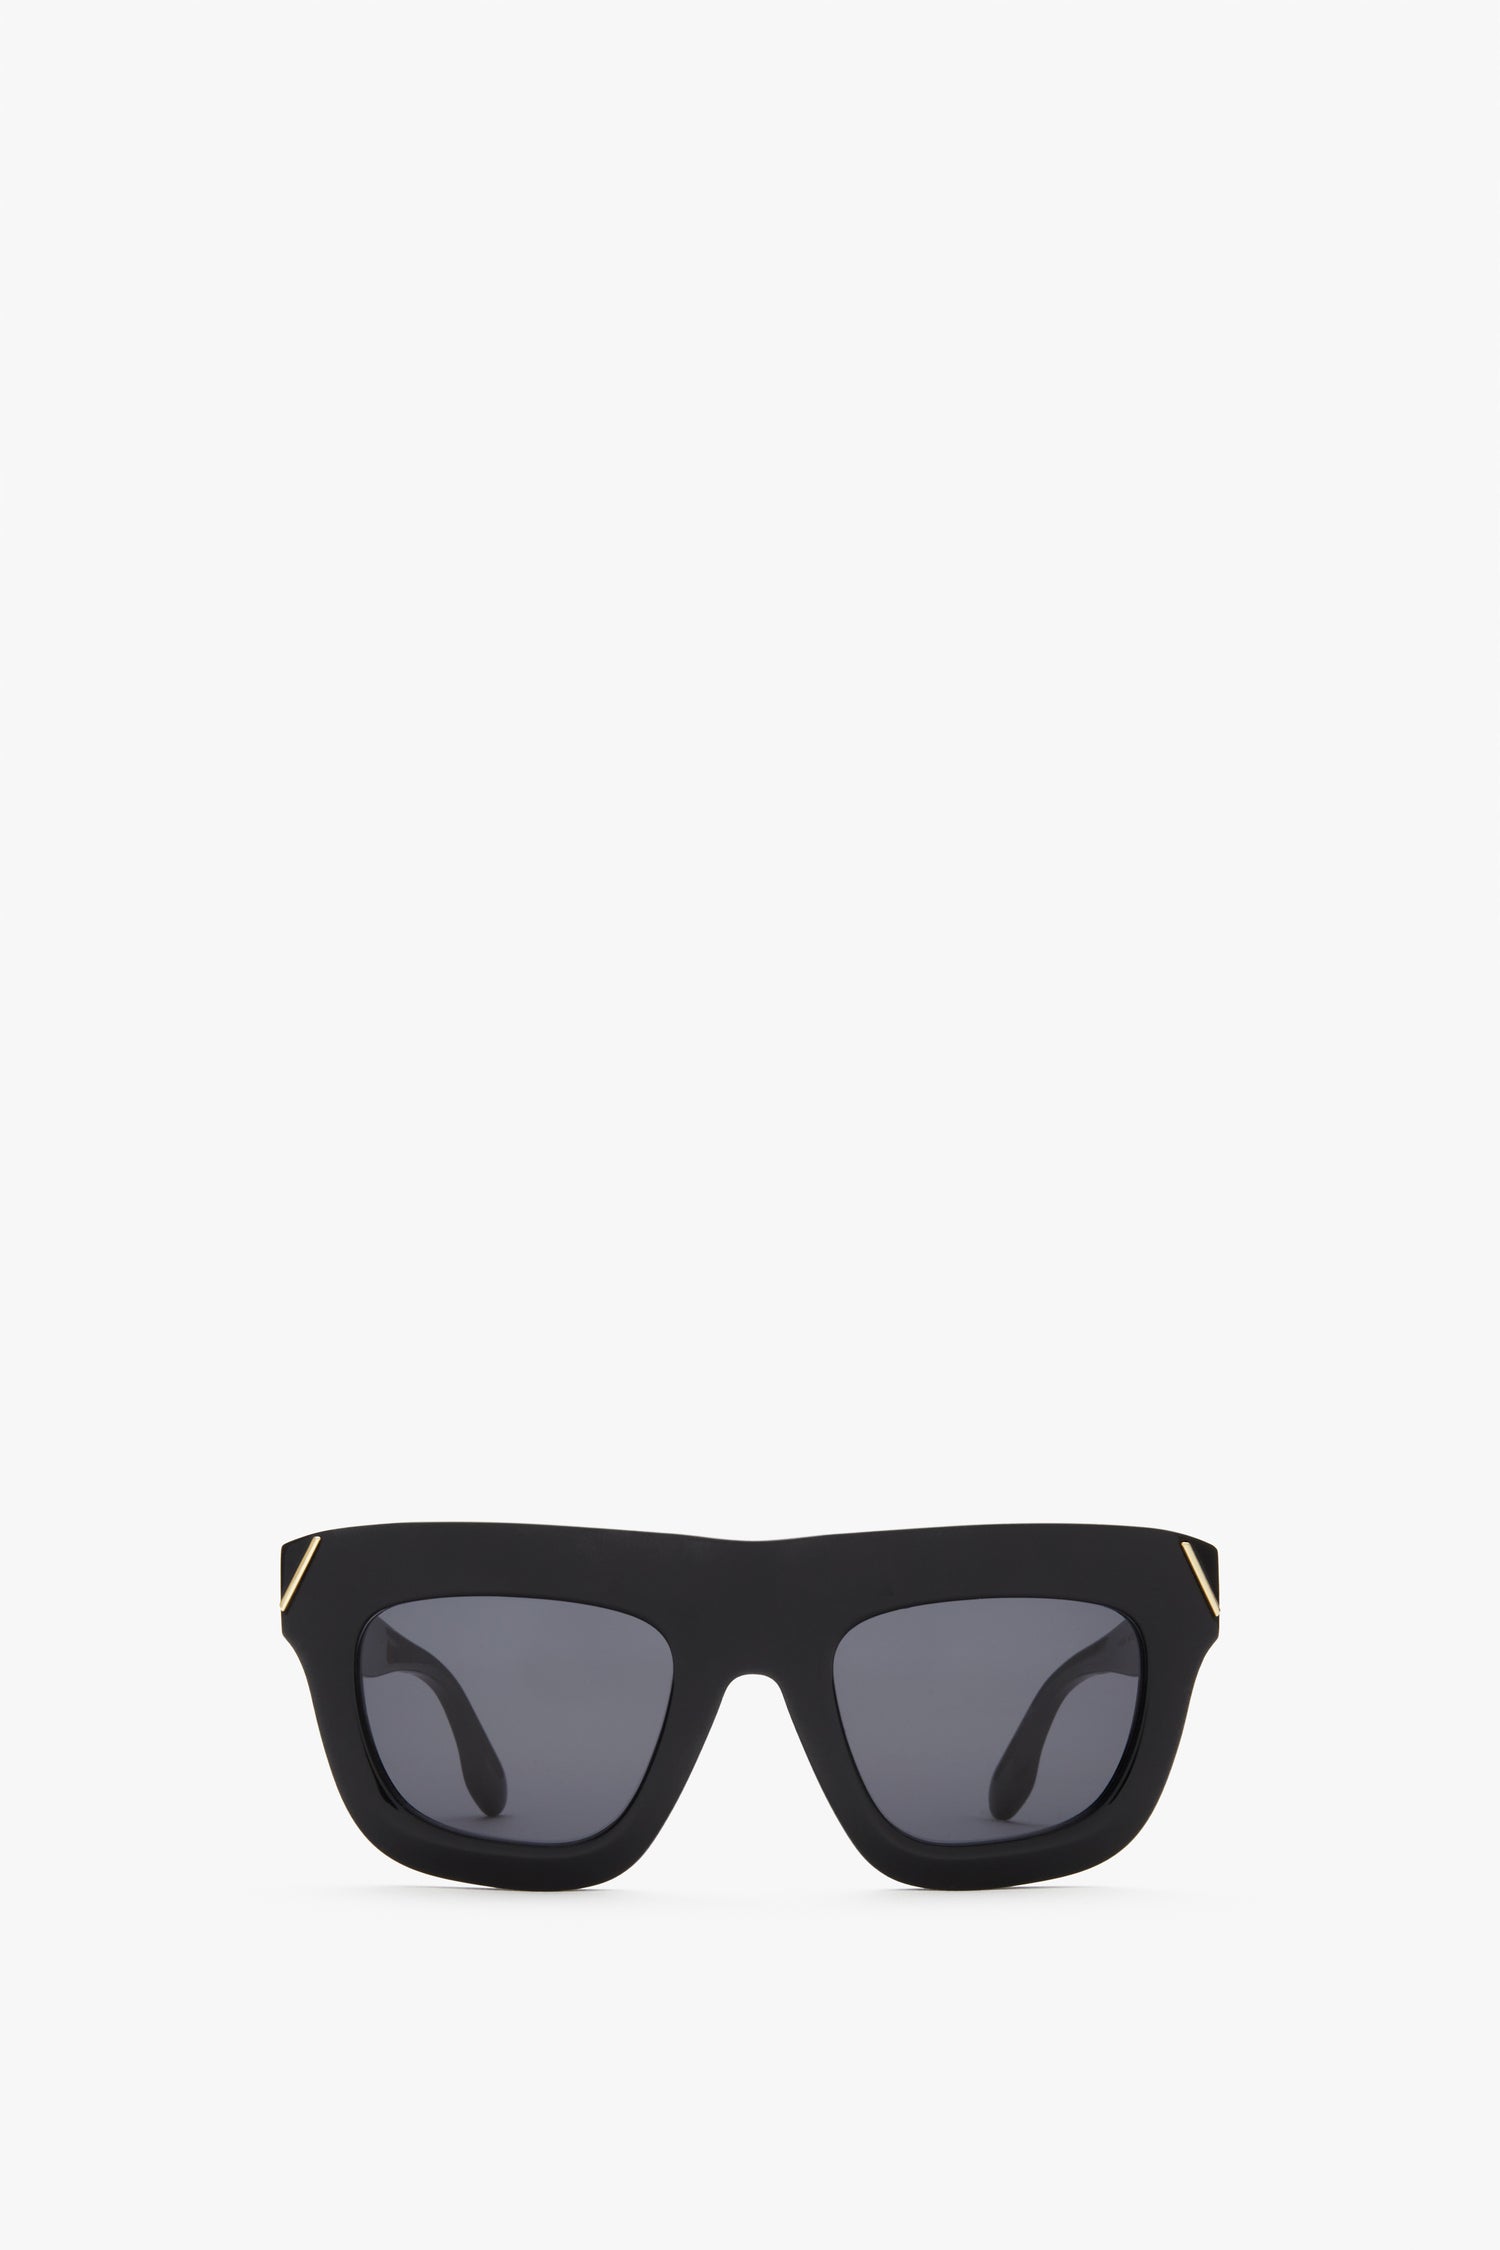 Wide oversized, square shaped sunglasses in black. These Victoria Beckham logo sunglasses have the VB logo on the temple and V shaped metal detailing on the hinges. Stylish and oversized yet in a classically vintage wide sunglass shape.